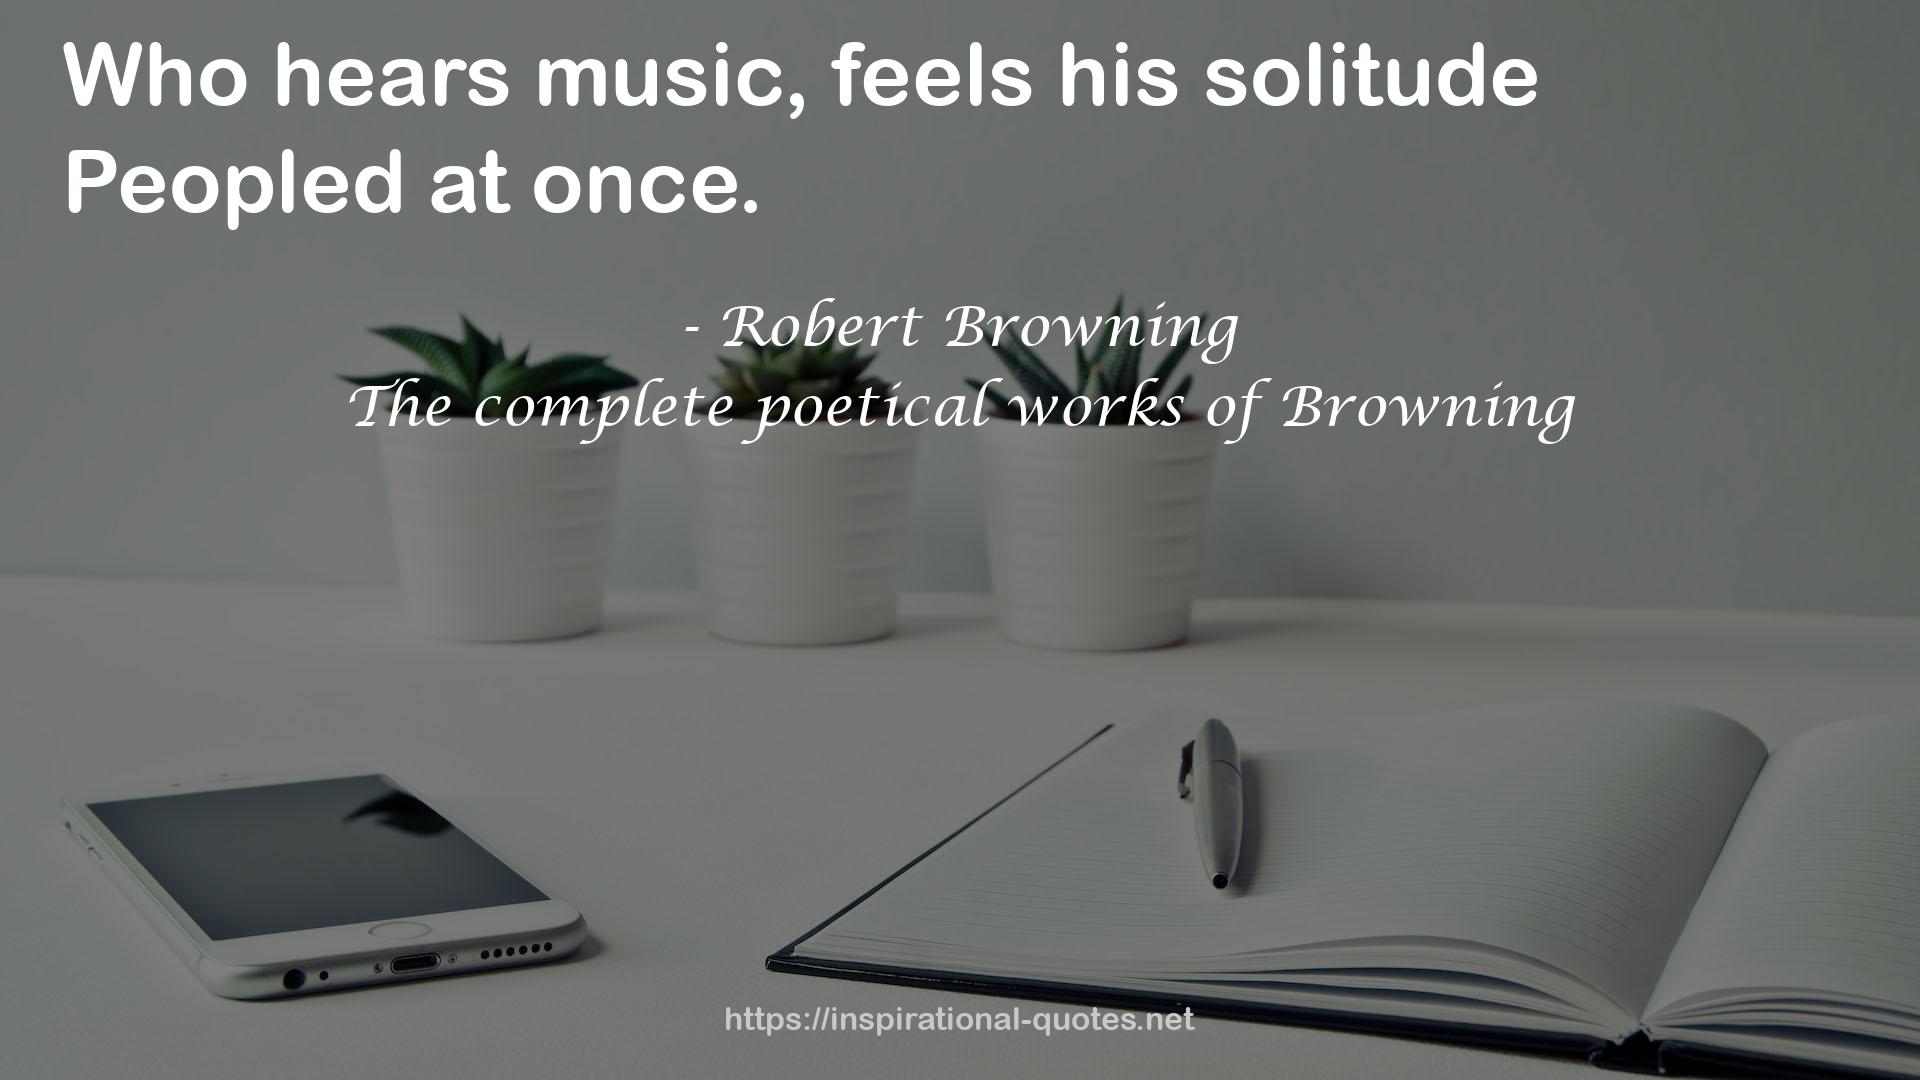 The complete poetical works of Browning QUOTES